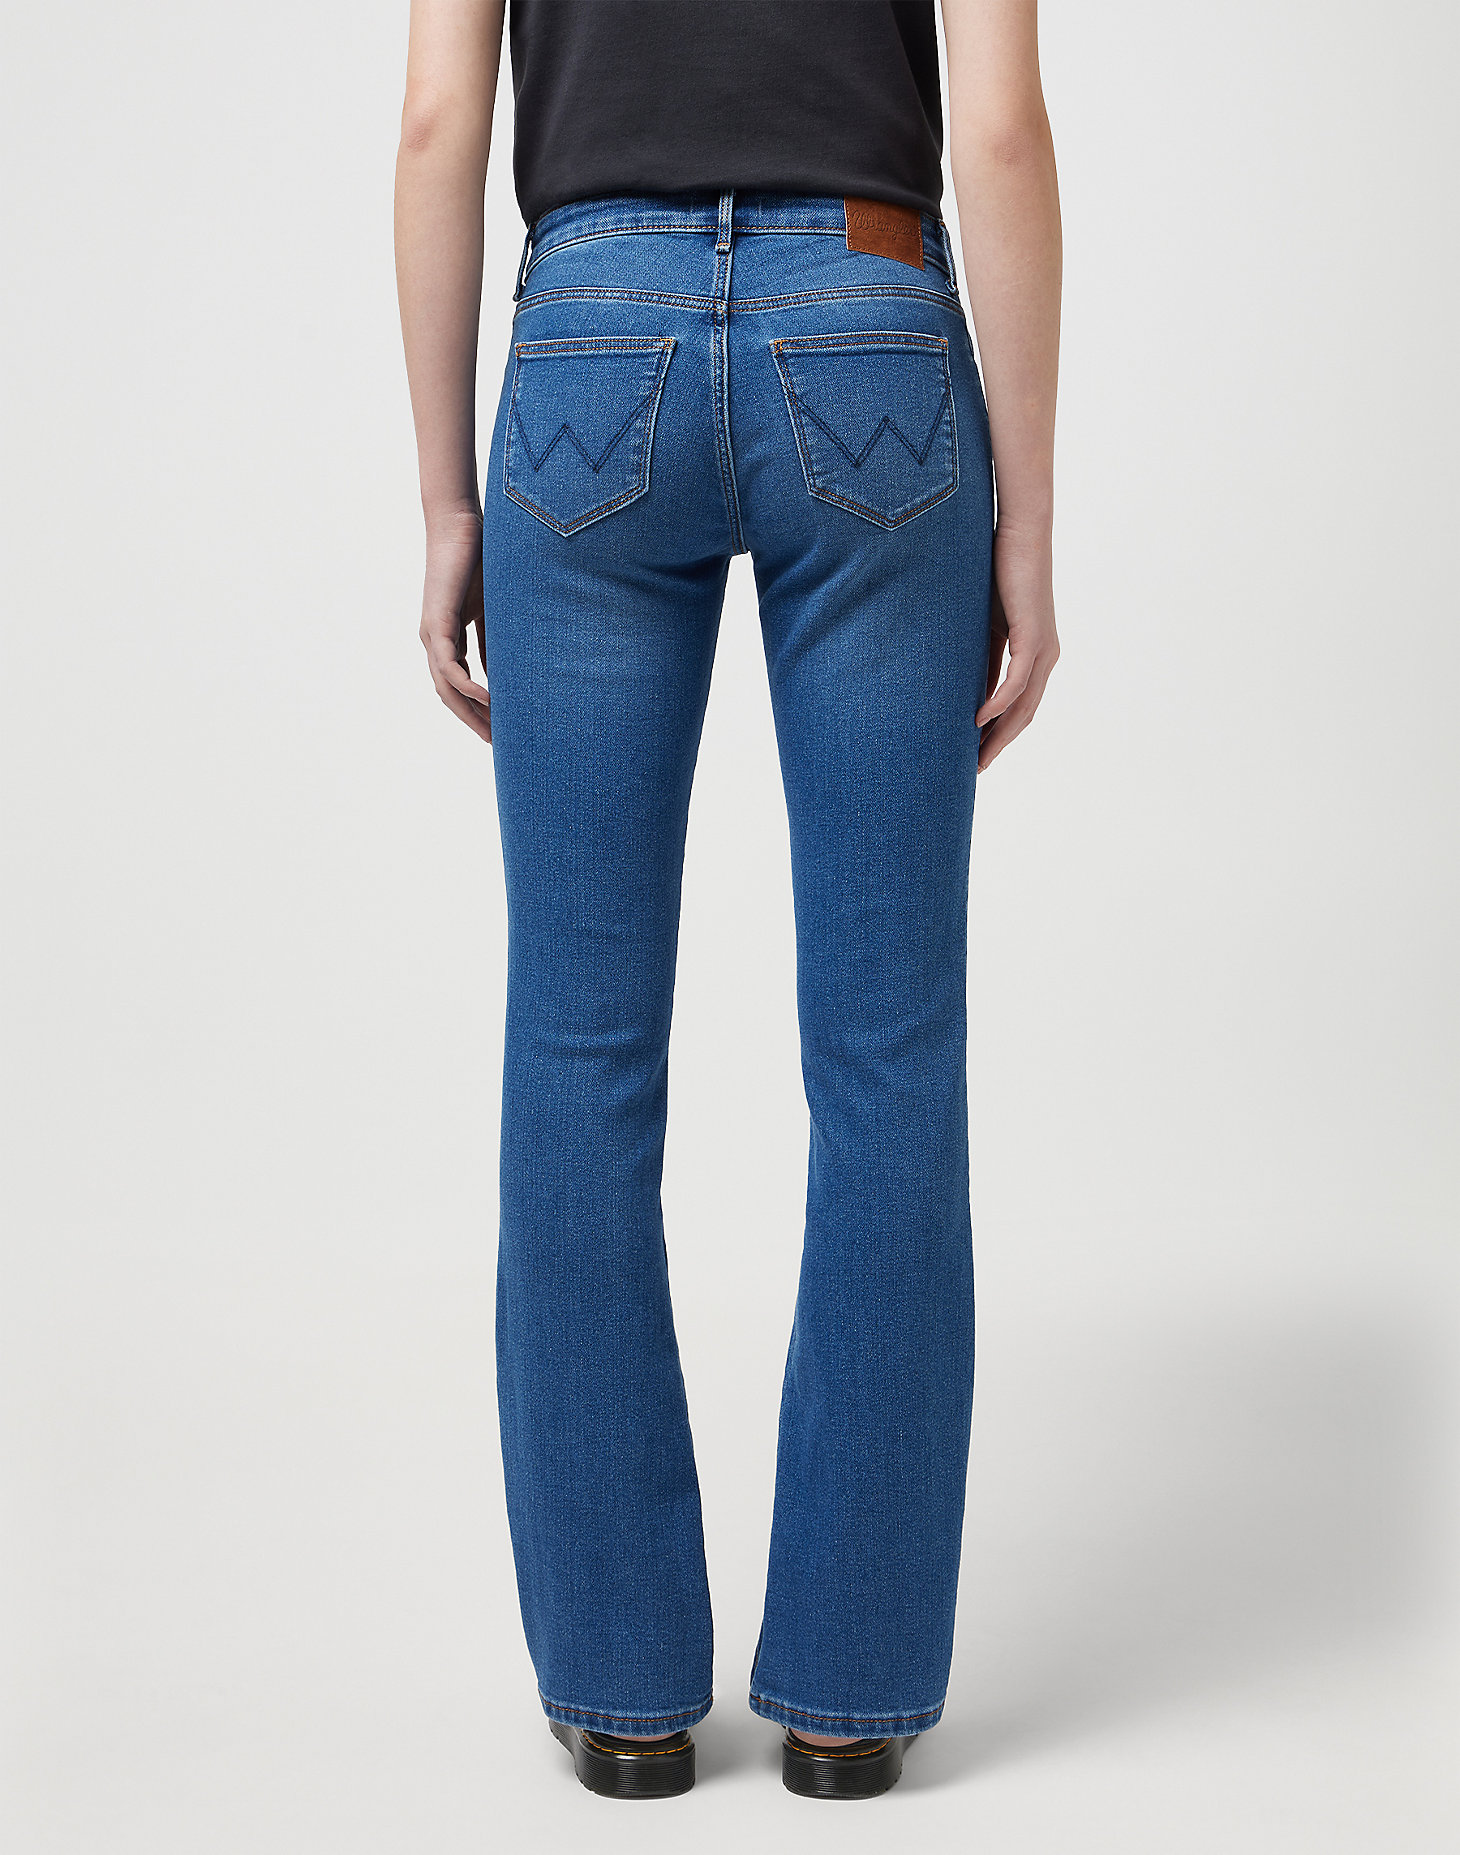 Bootcut Jeans in Camellia alternative view 2